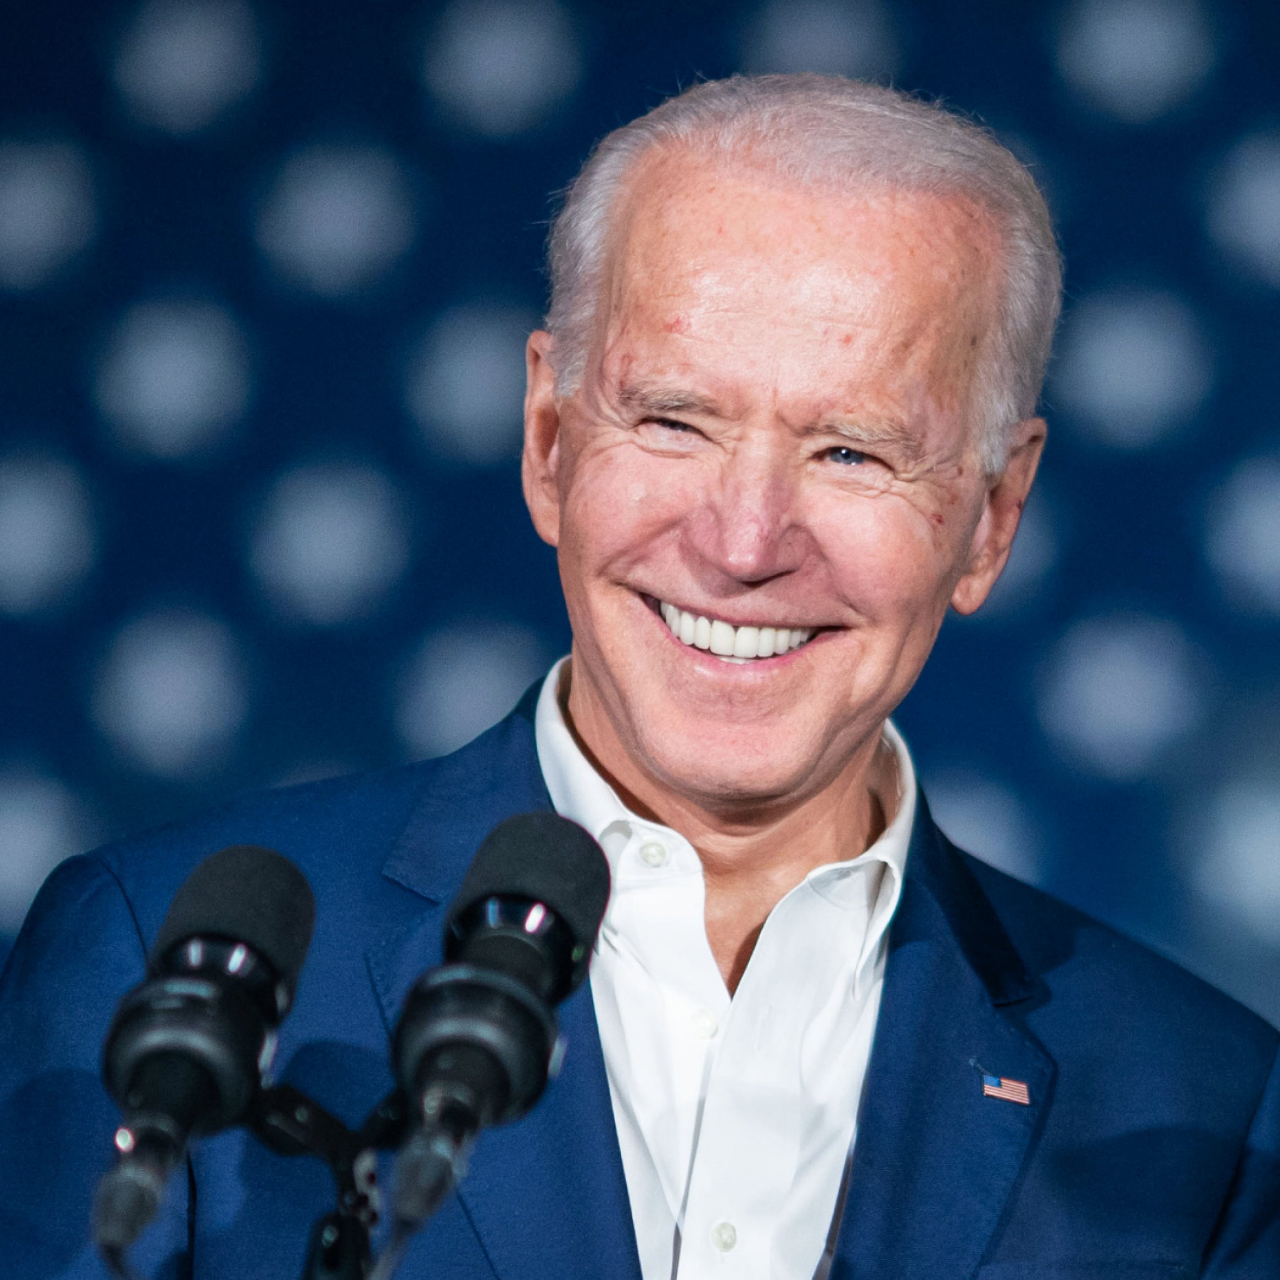 Joe Biden wasted no time issuing fresh executive orders and initiatives aimed at stopping the coronavirus pandemic on his first full day in office.